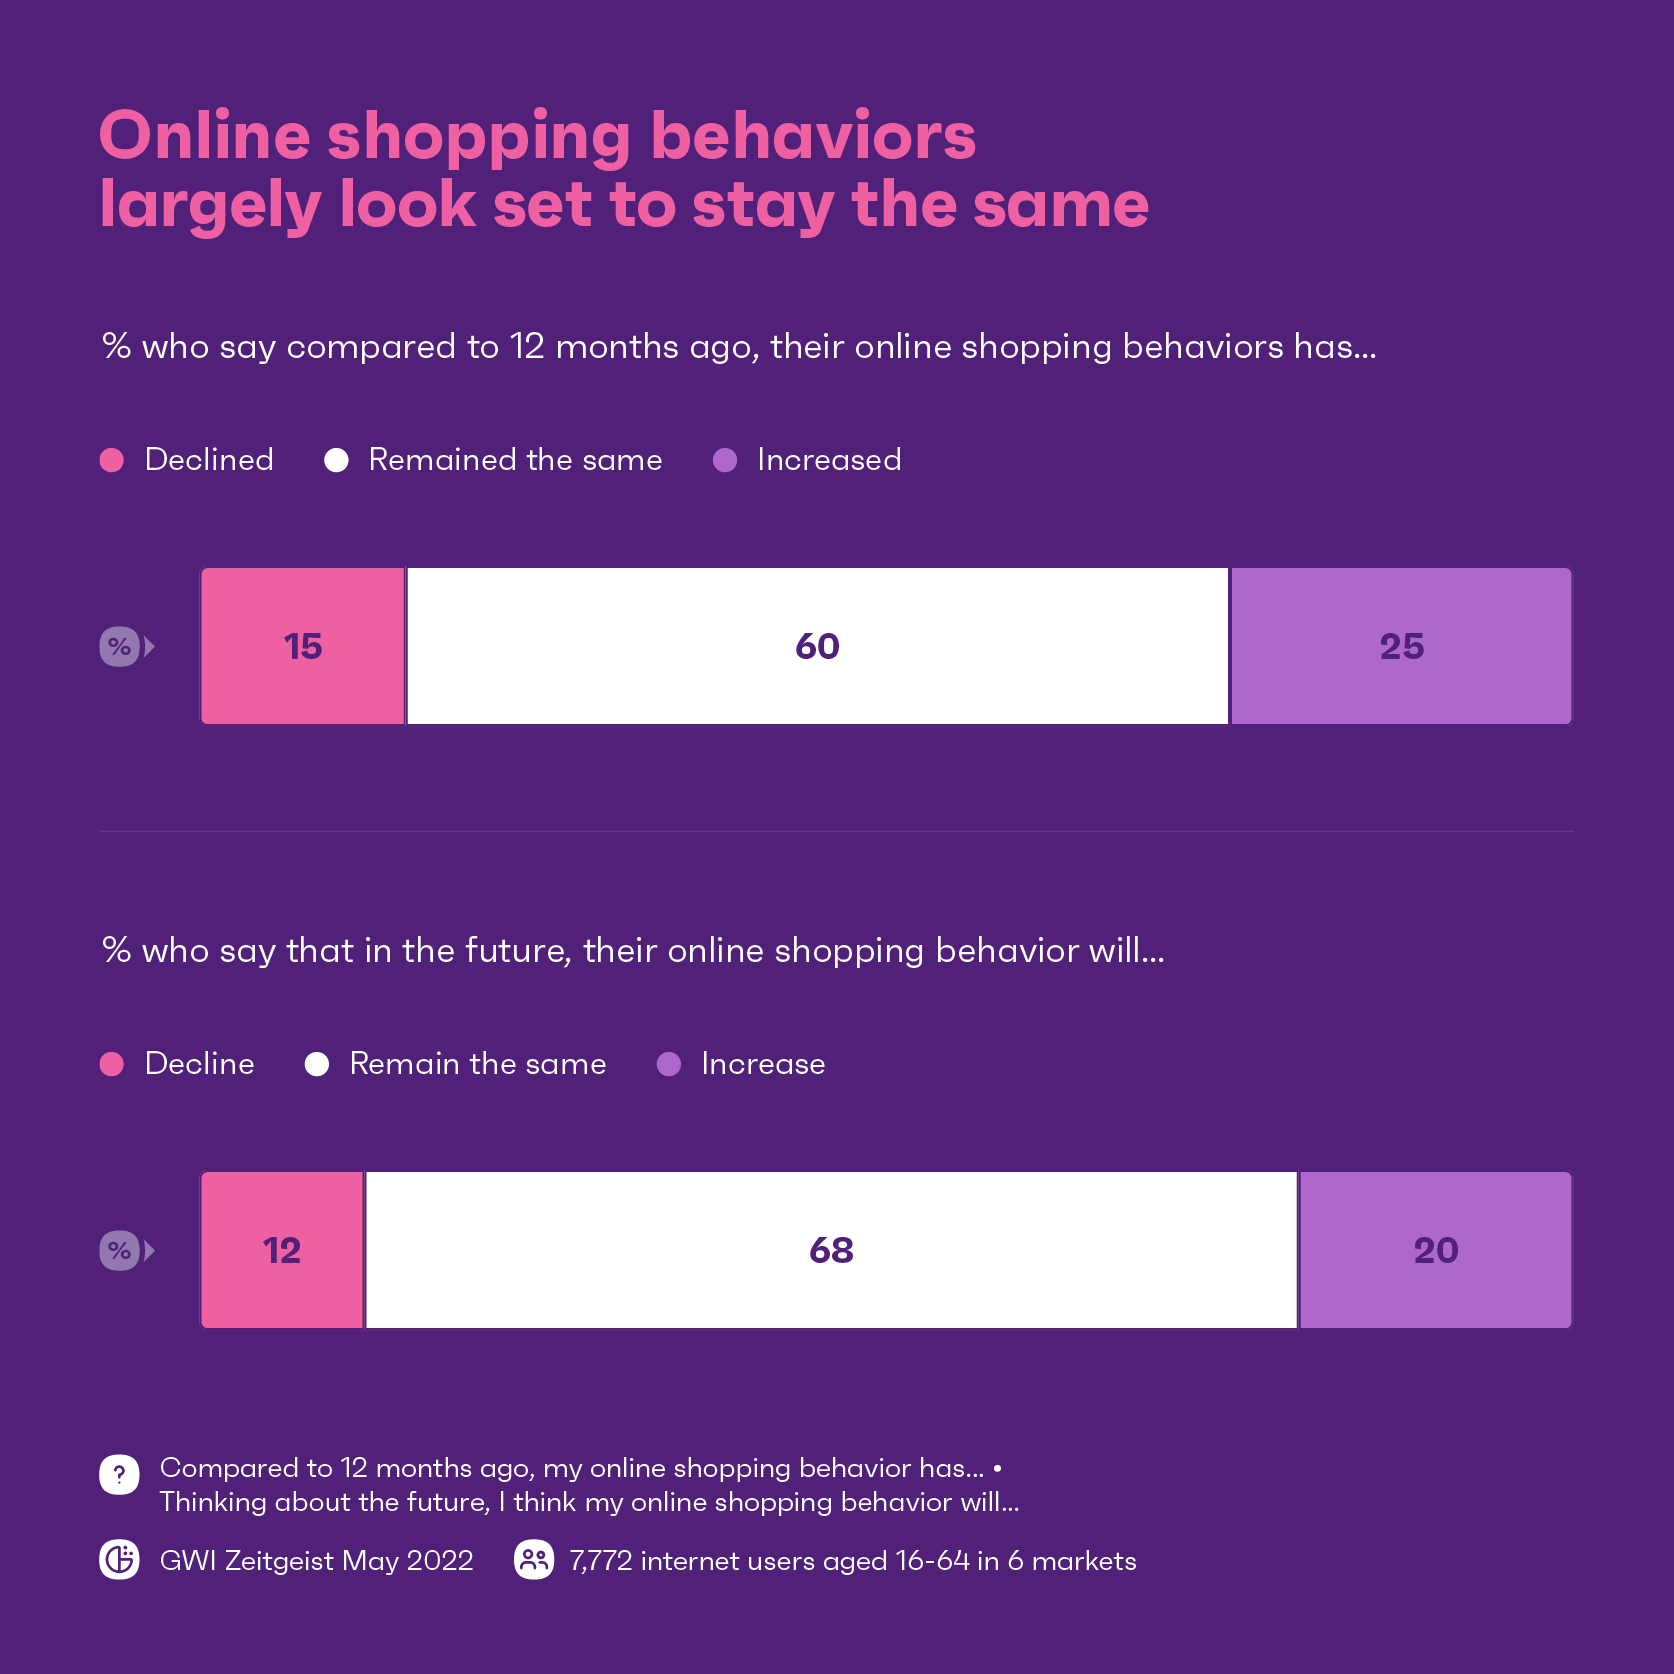 Online shopping behaviors largely look set to stay the same